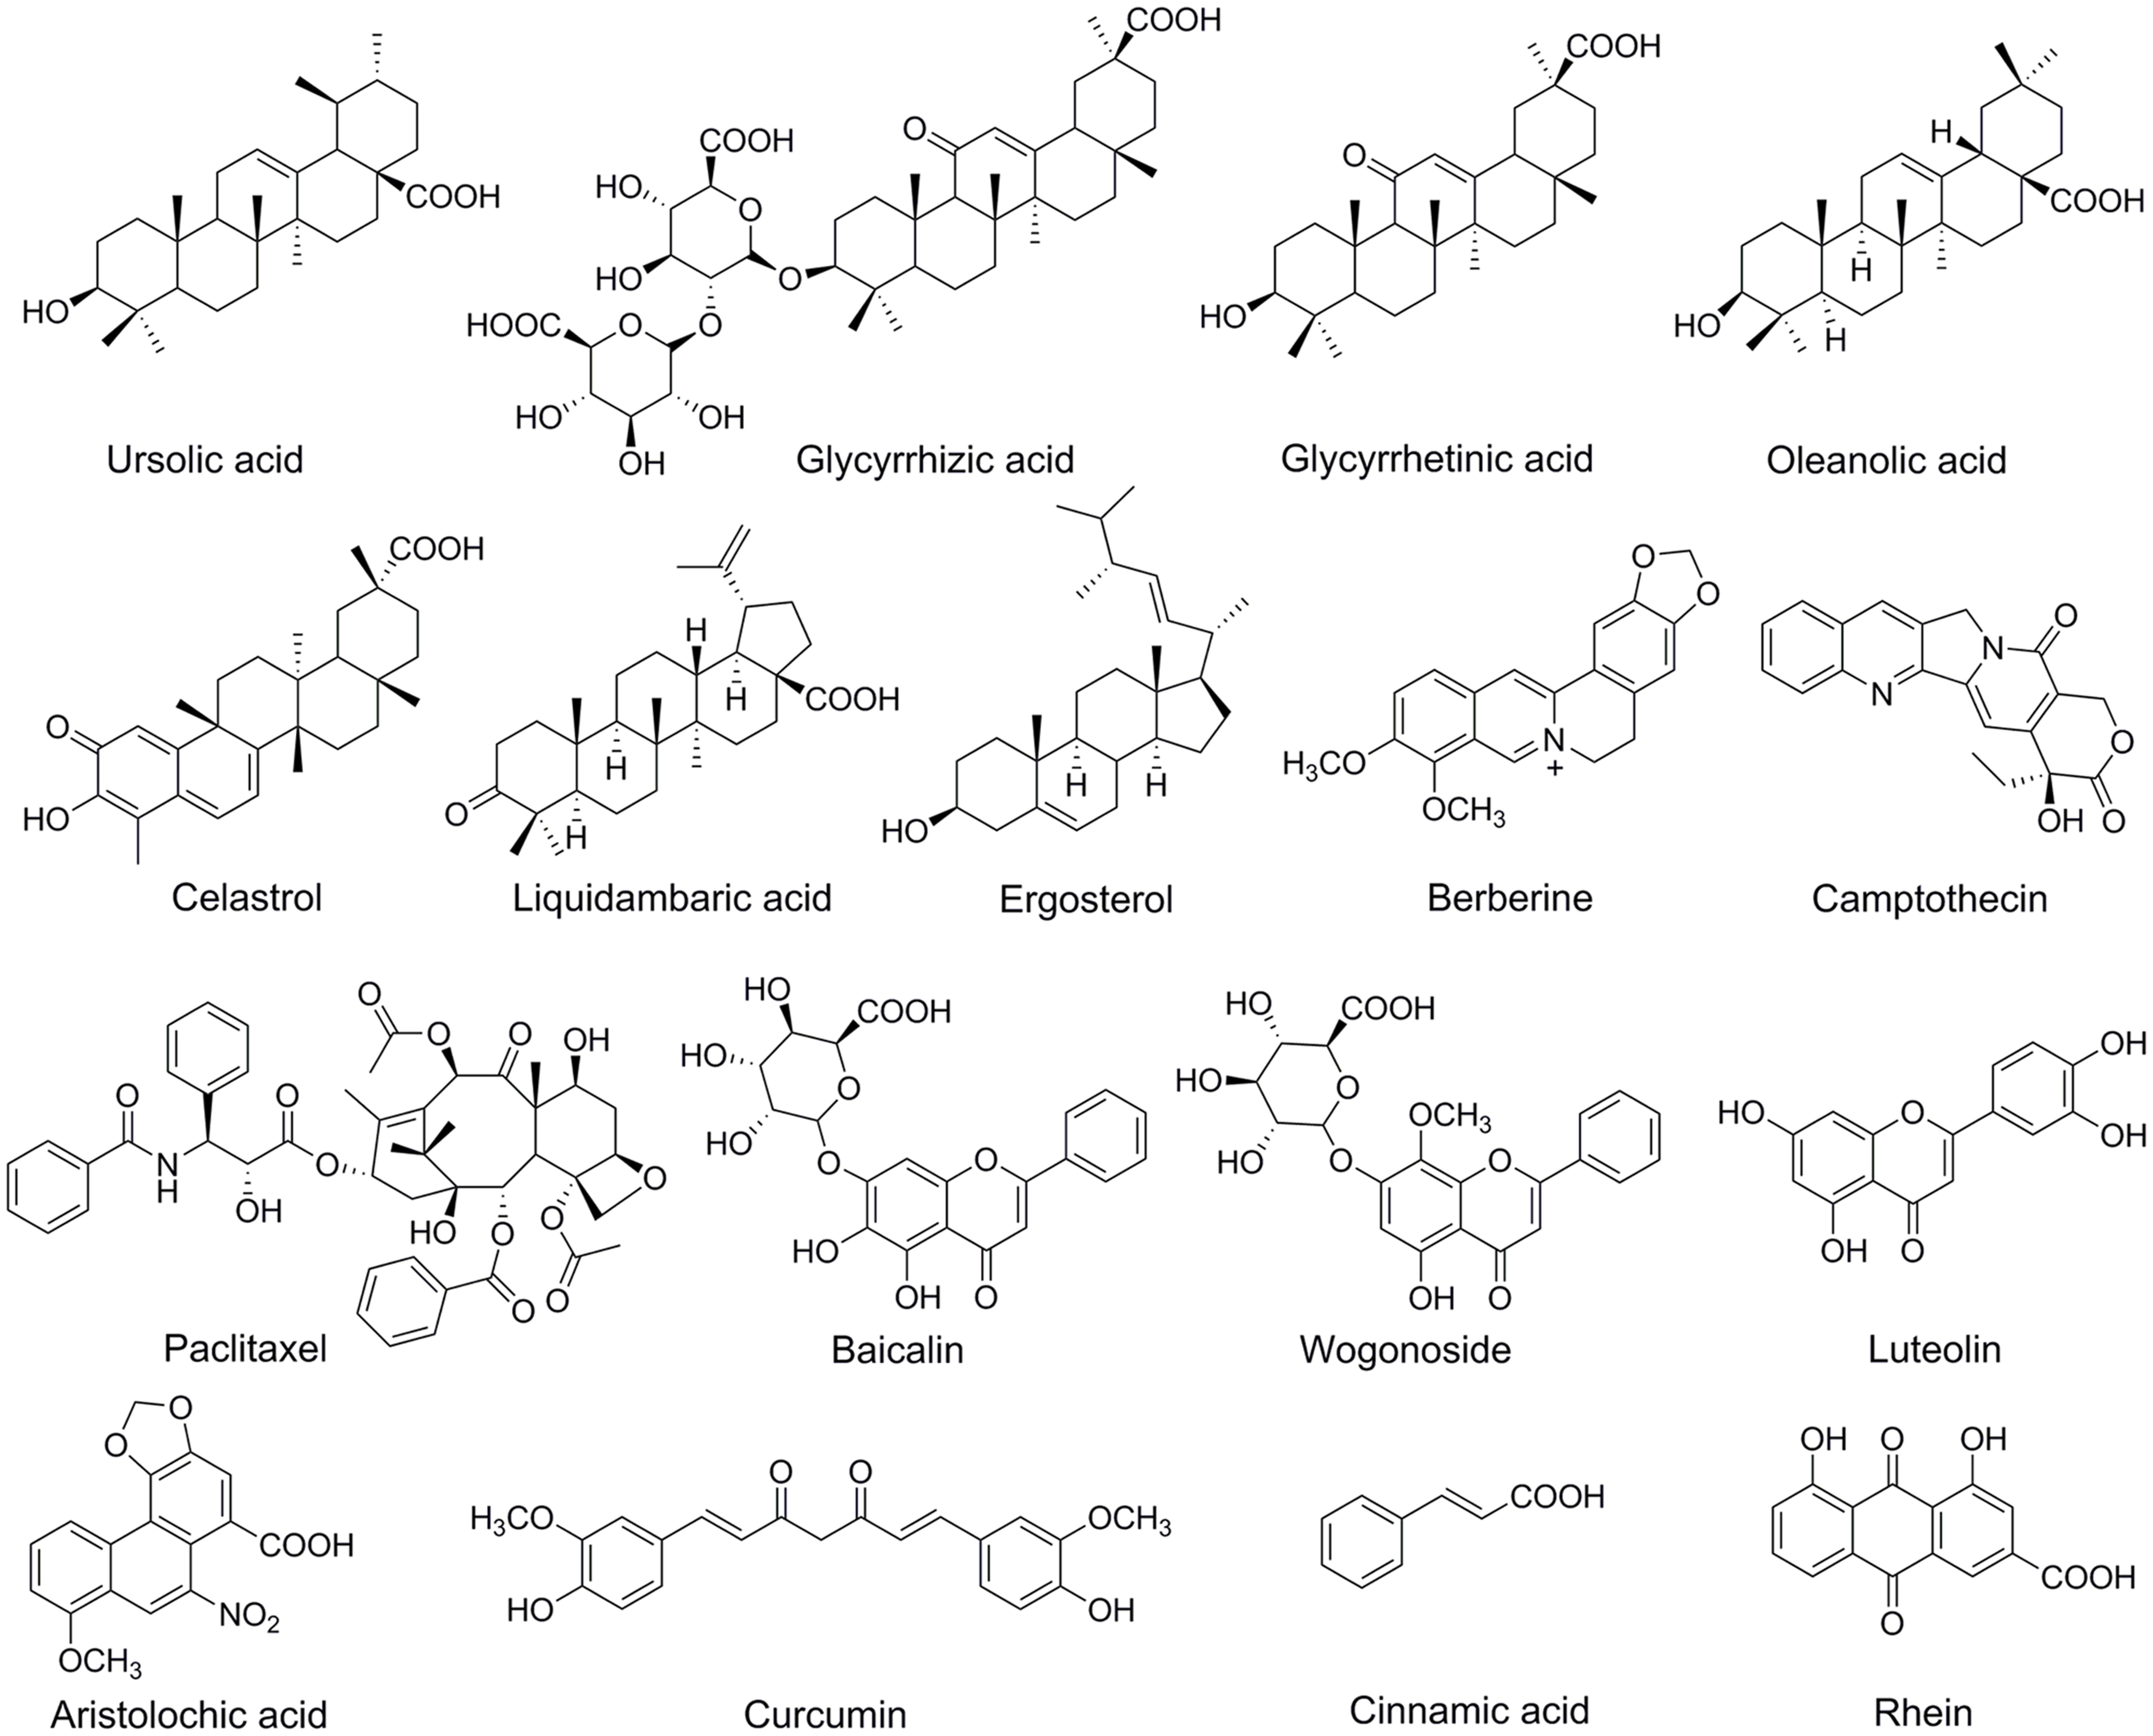 Representative chemical structures of the natural products.